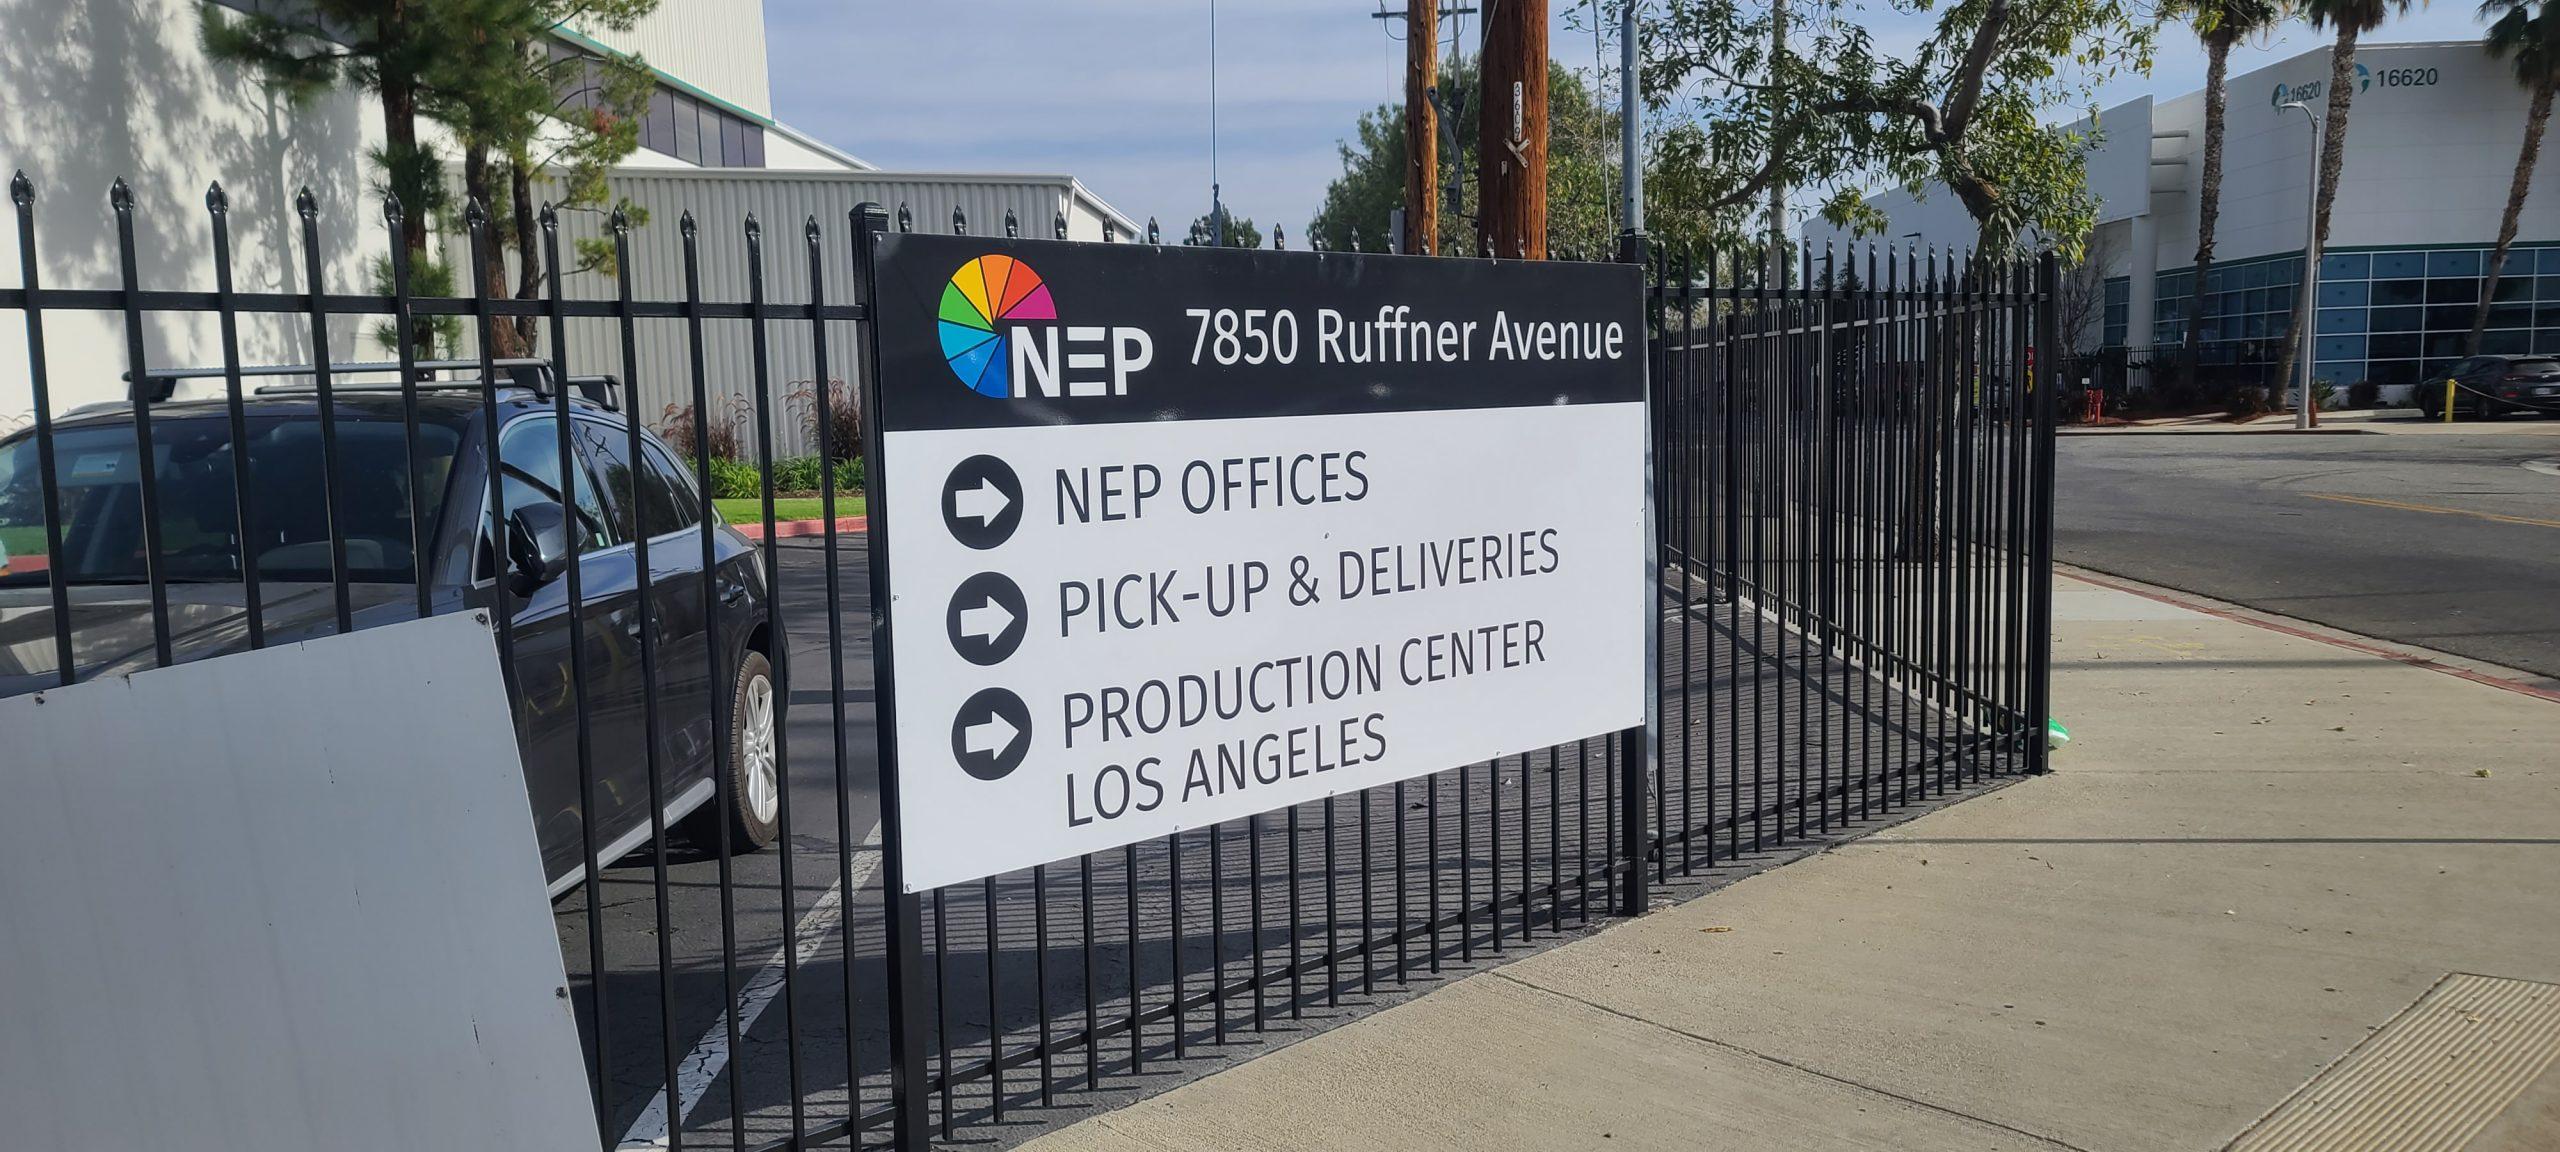 Don't want rusty signs? Choose dibond signage like those on Bexel's Van Nuys location. Their branding will be pristine with these durable wayfinding signs.